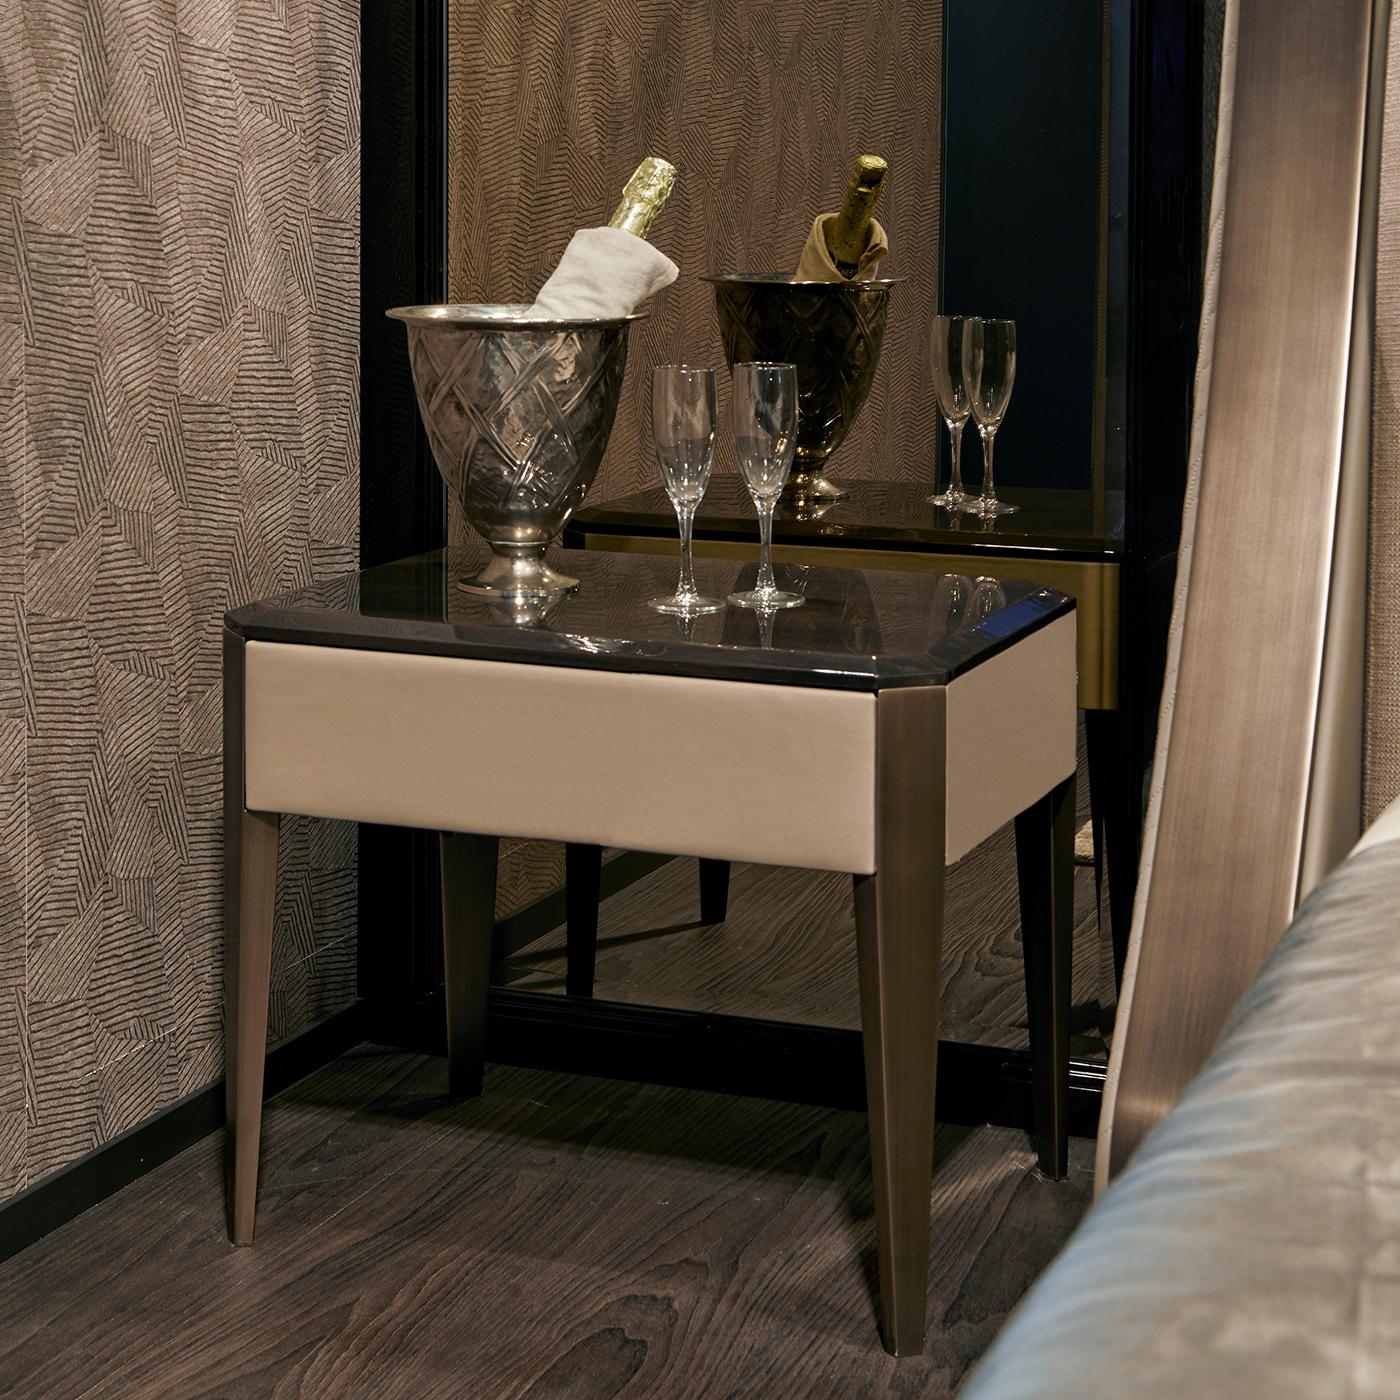 An exquisite design of clean architectural value, this bedside table flaunts an innovative combination of finishes and materials. With a structure made of poplar plywood upholstered of leather or synthetic leather upon choice, it features a